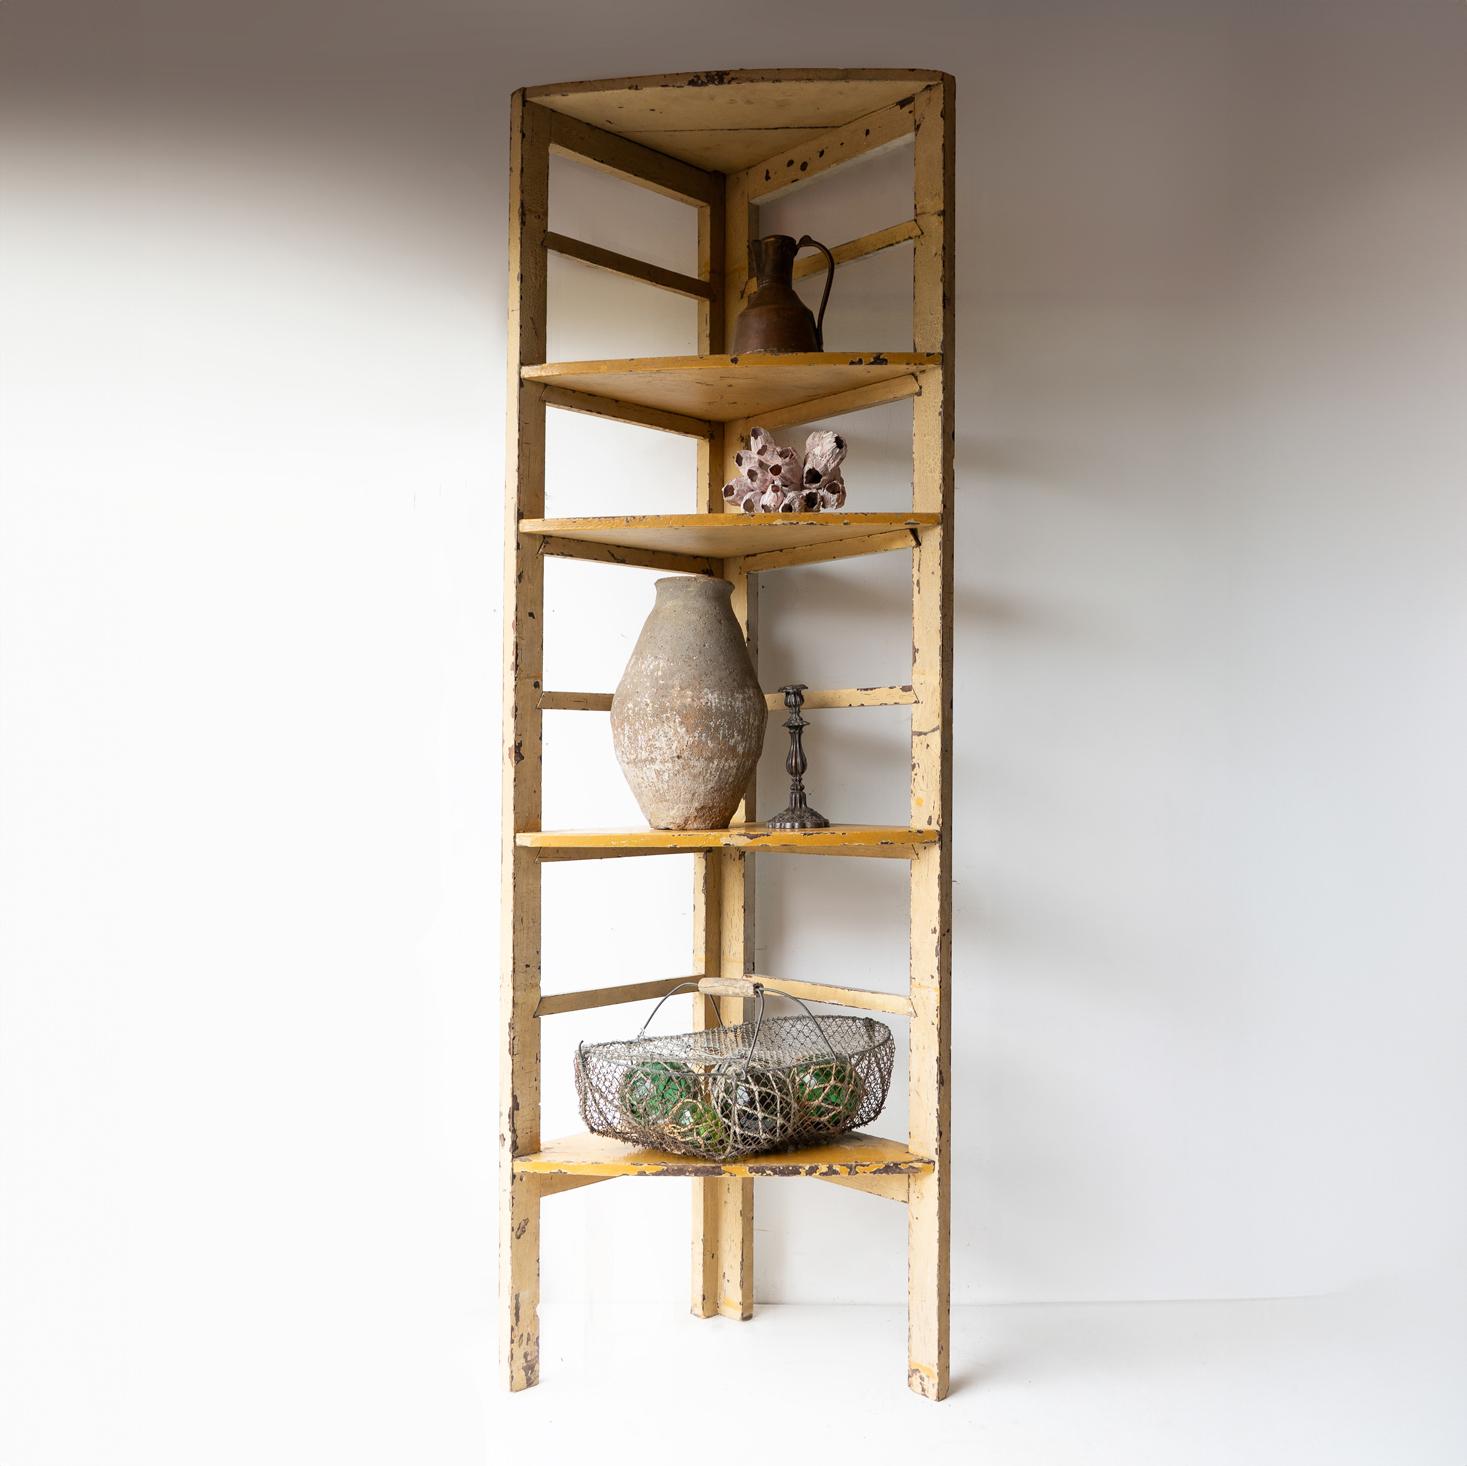 ADJUSTABLE CORNER SHELVING UNIT 
Seven removable triangular shelves (not including the fixed top) can be placed to suit the needs of the items you want to display. 

Originally from a German florist's shop.

In solid wood with original mustard